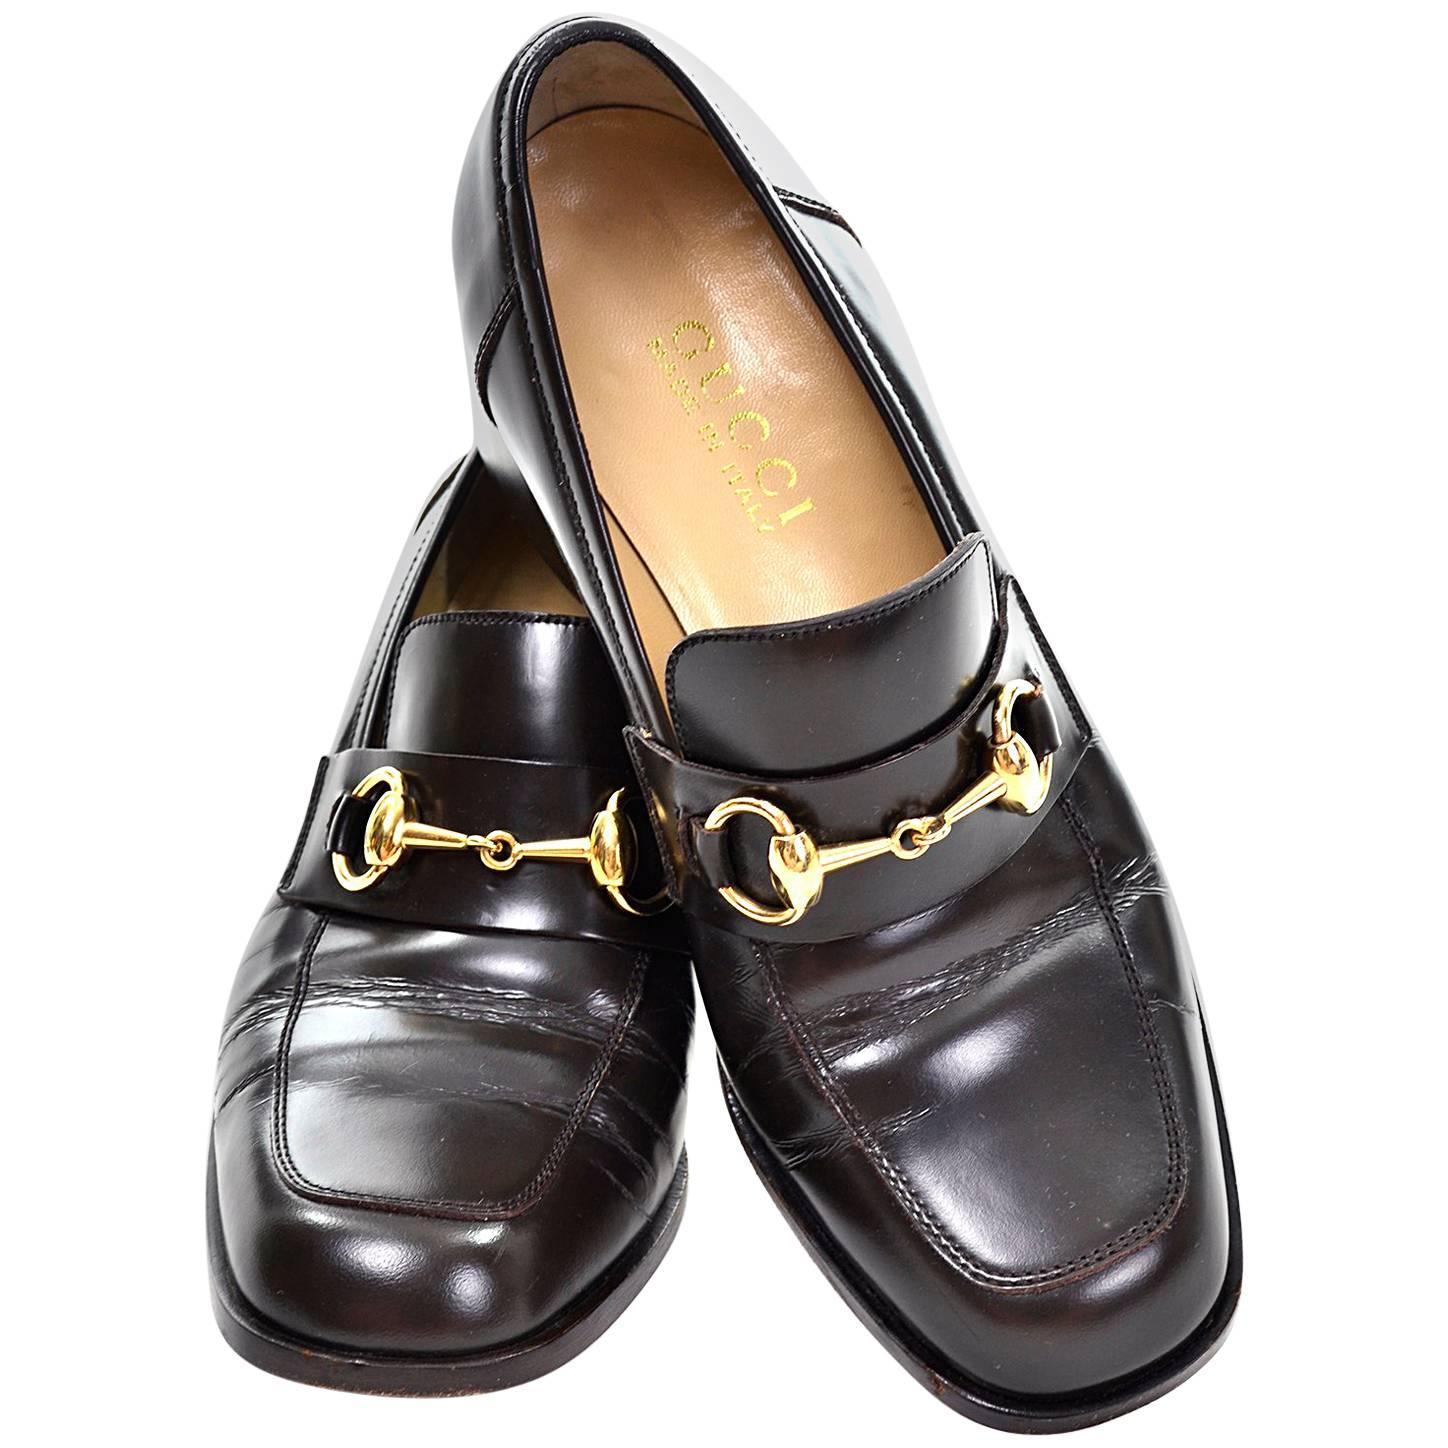 Gucci Vintage Shoes Brown Leather Loafers w/ Horsebit Buckles Size 7.5